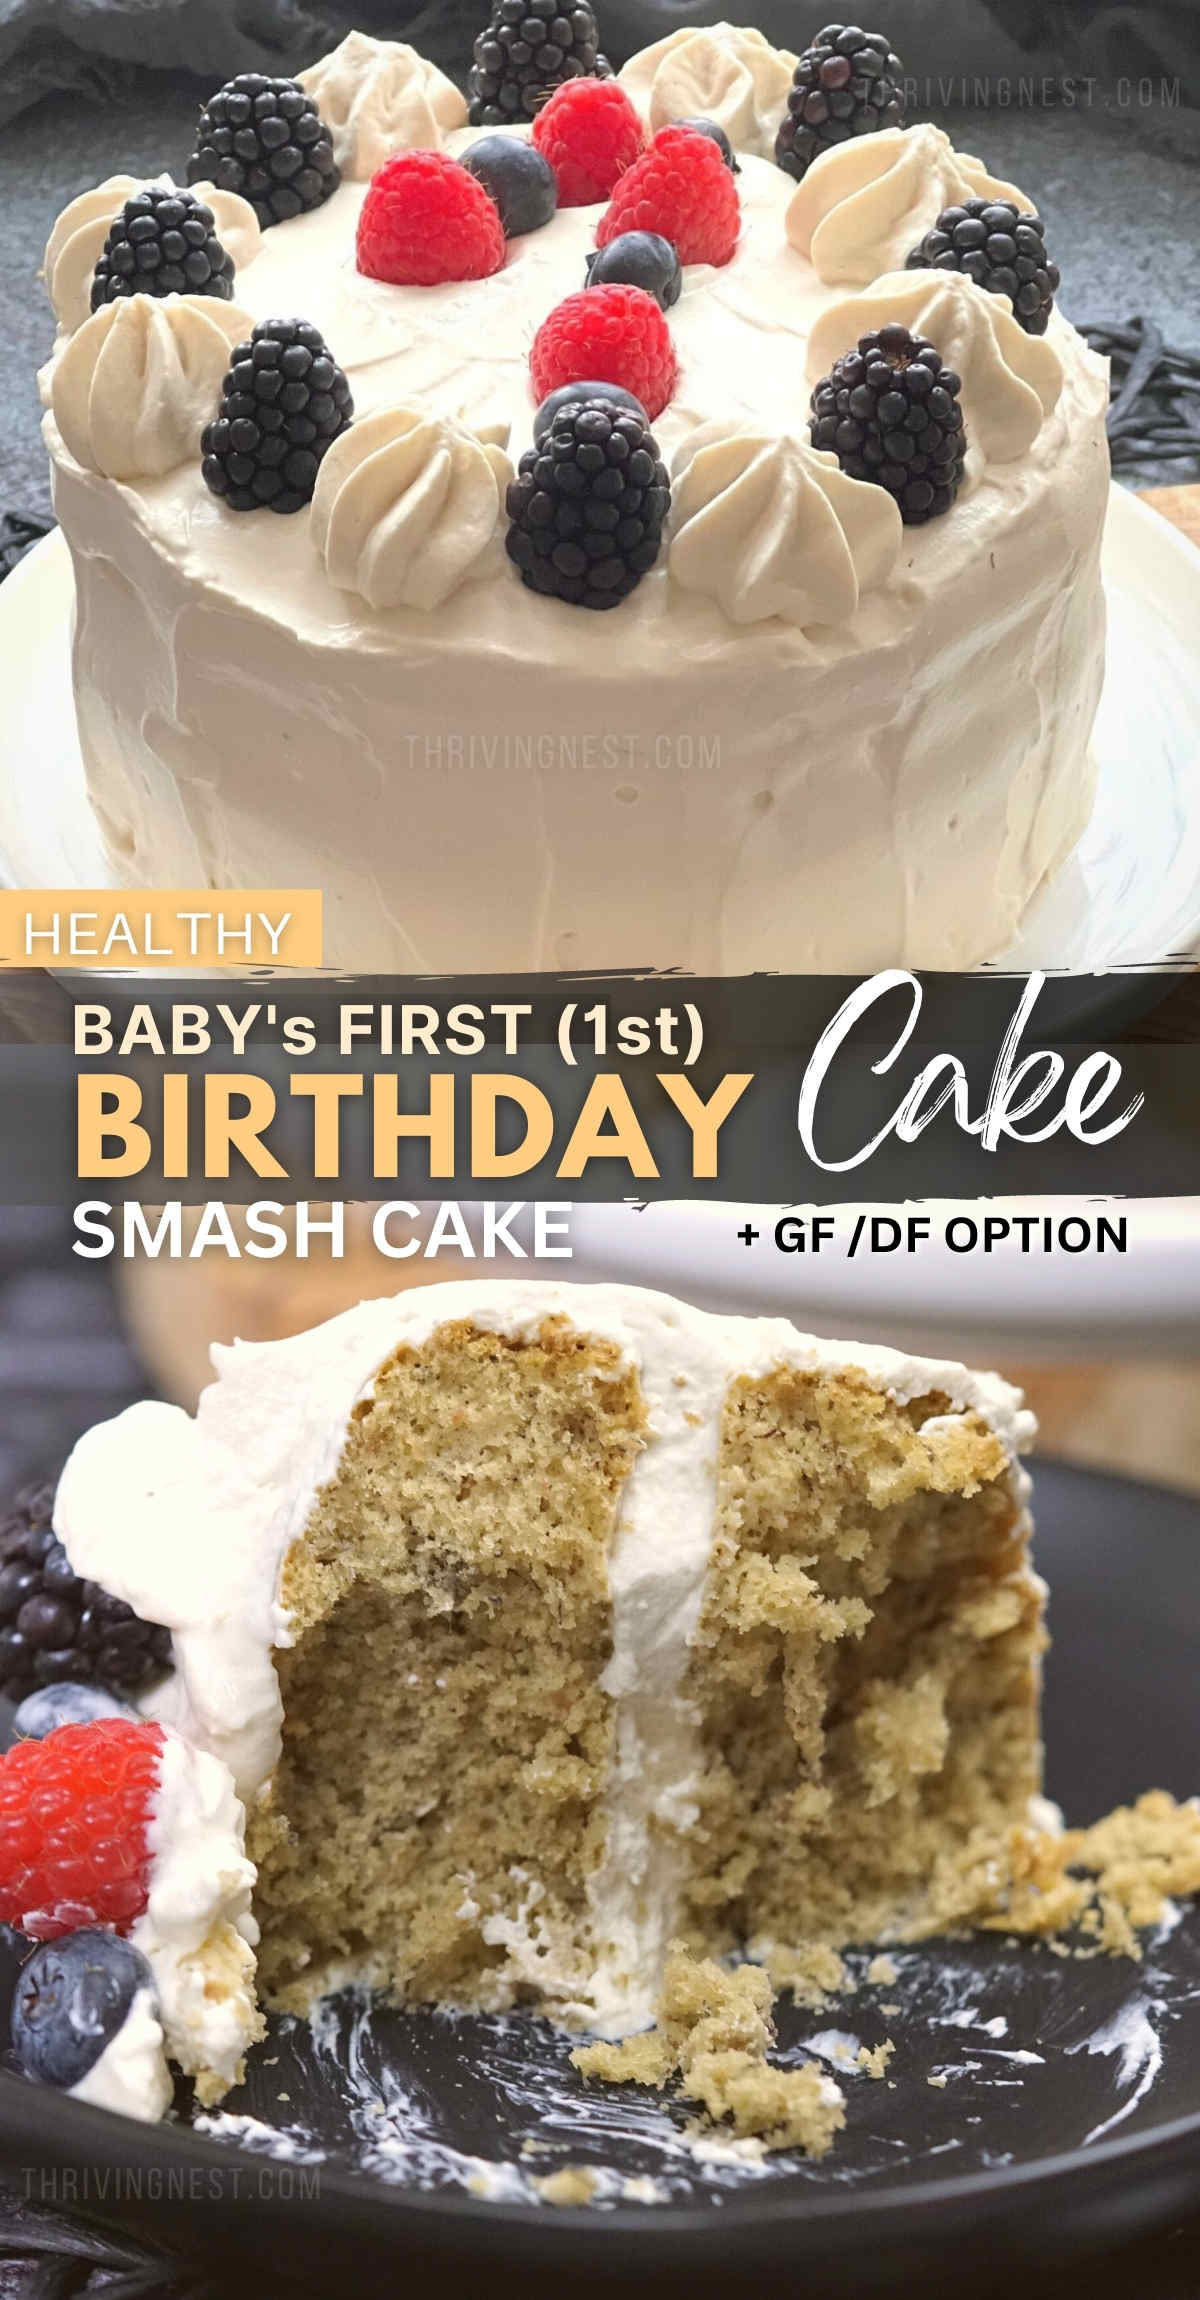 This simple easy first birthday cake recipe for your one year old features a soft airy vanilla sponge frosted with silky smooth cream, naturally sweetened with fruit. This healthy baby smash cake is super easy to make and requires no baking powder or artificial colors, it's refined sugar free and perfect for both boys and girls for their 1st birthday. Celebrate your baby's first birthday with this healthy, soft 1st smash cake! #babycake #first #birthday #cake #samshcake #baby #healthy 